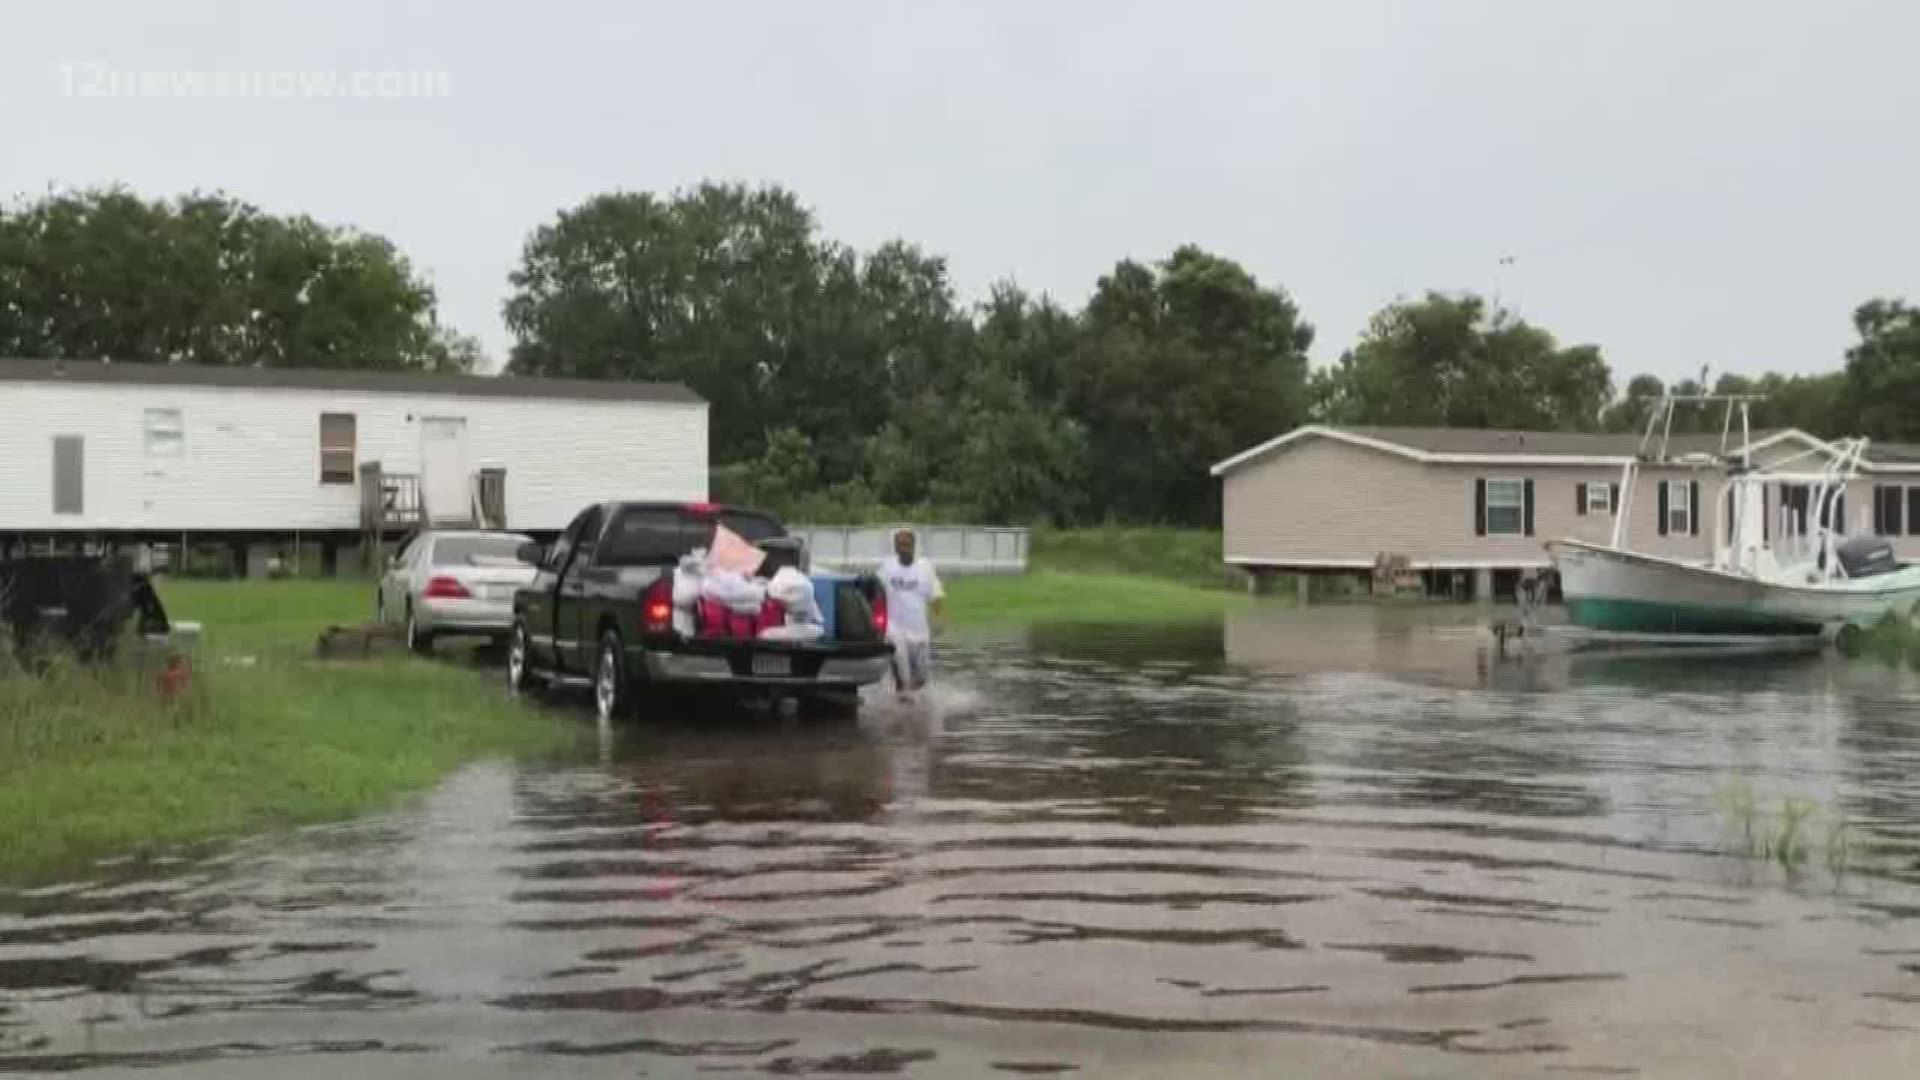 Evacuated residents are heading home, some finding their neighborhoods underwater.